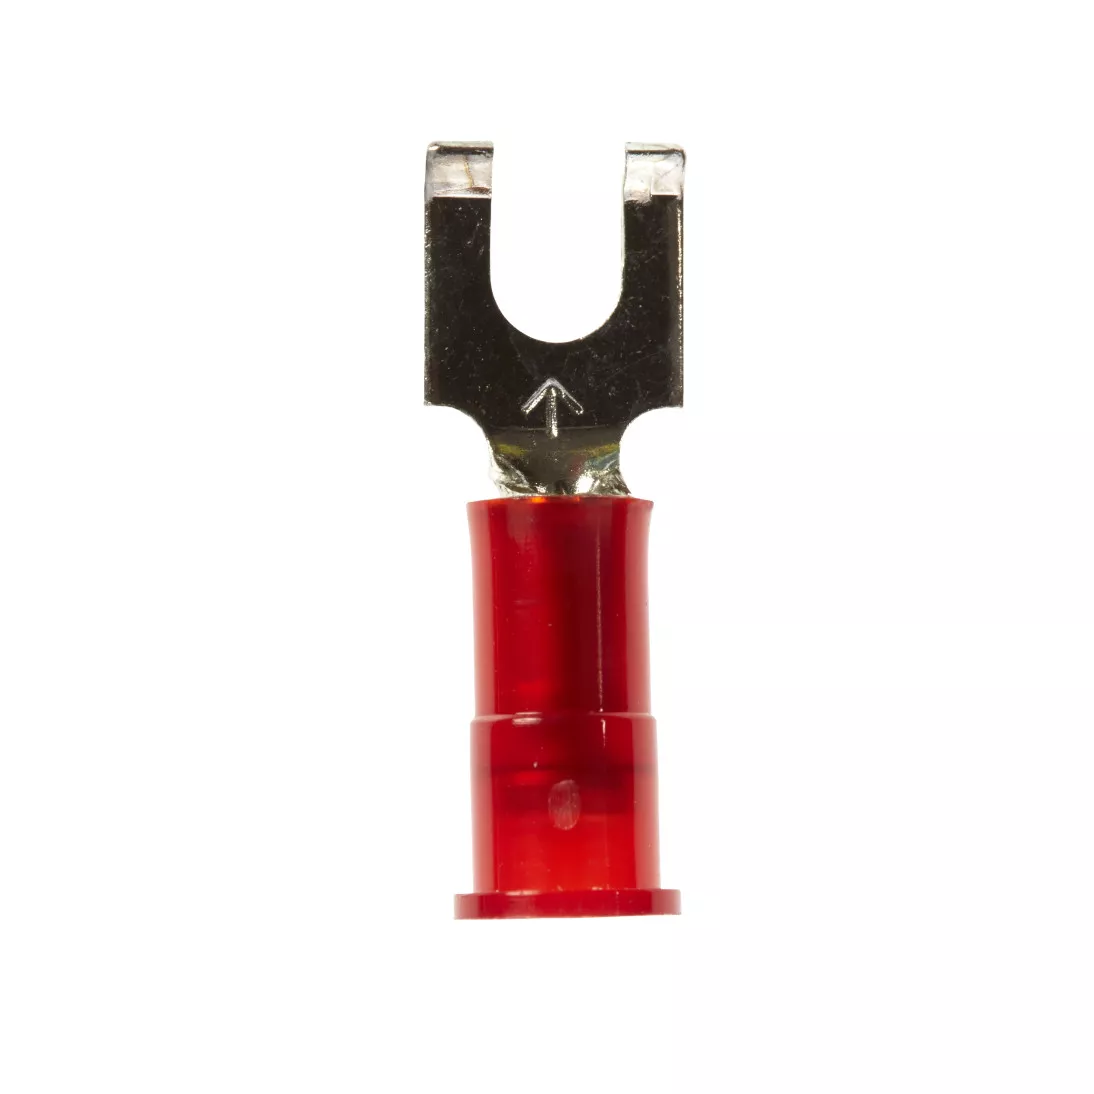 3M™ Scotchlok™ Block Fork Nylon Insulated, 100/bottle, MNG18-6FBX,
suitable for use in a terminal block, 500/Case